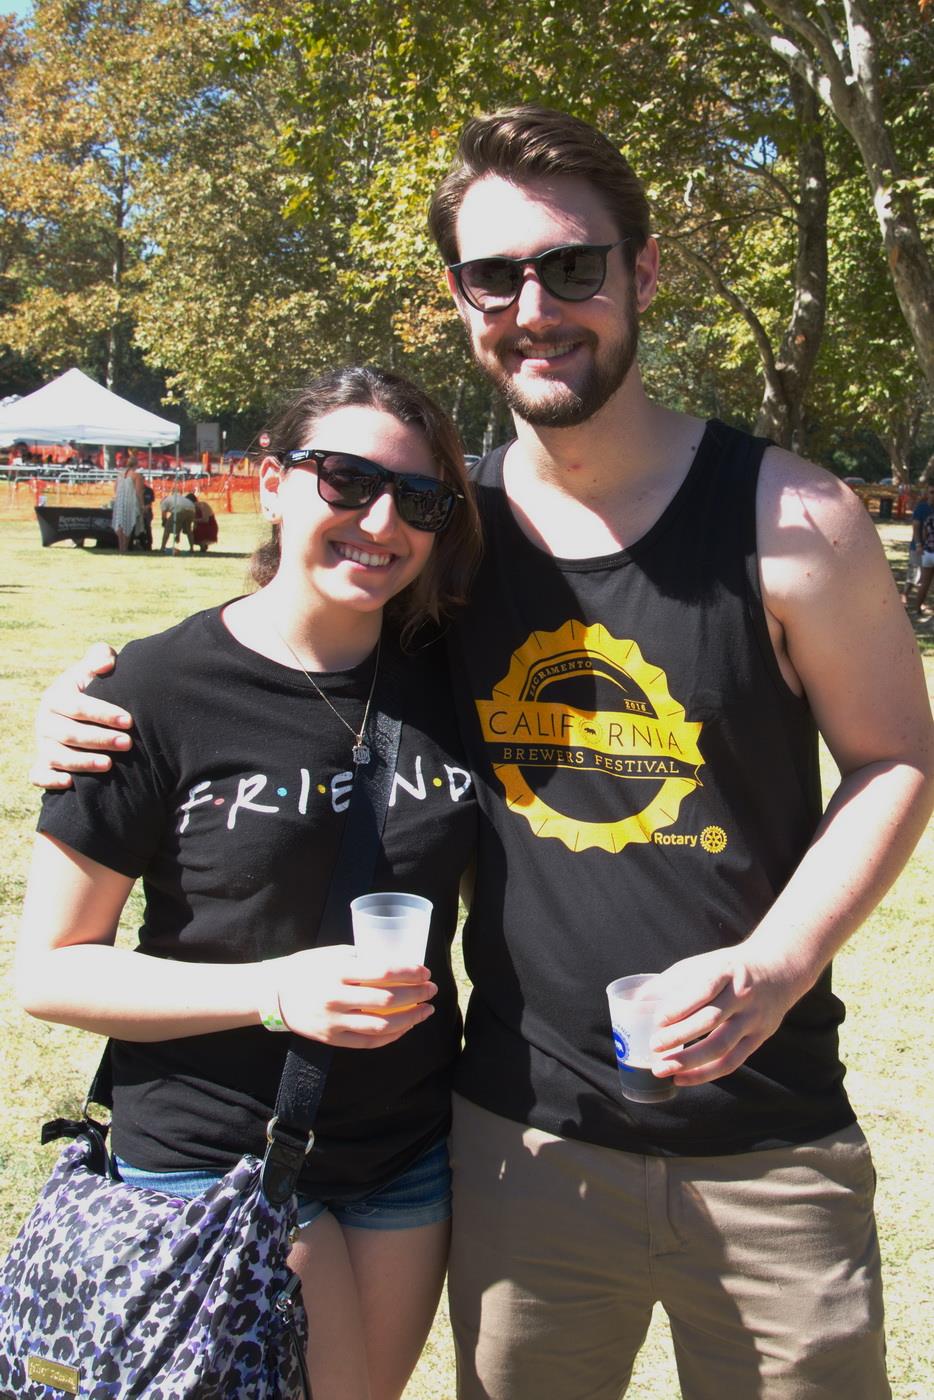 California Brewers Festival 2016 Rotary Club of Point